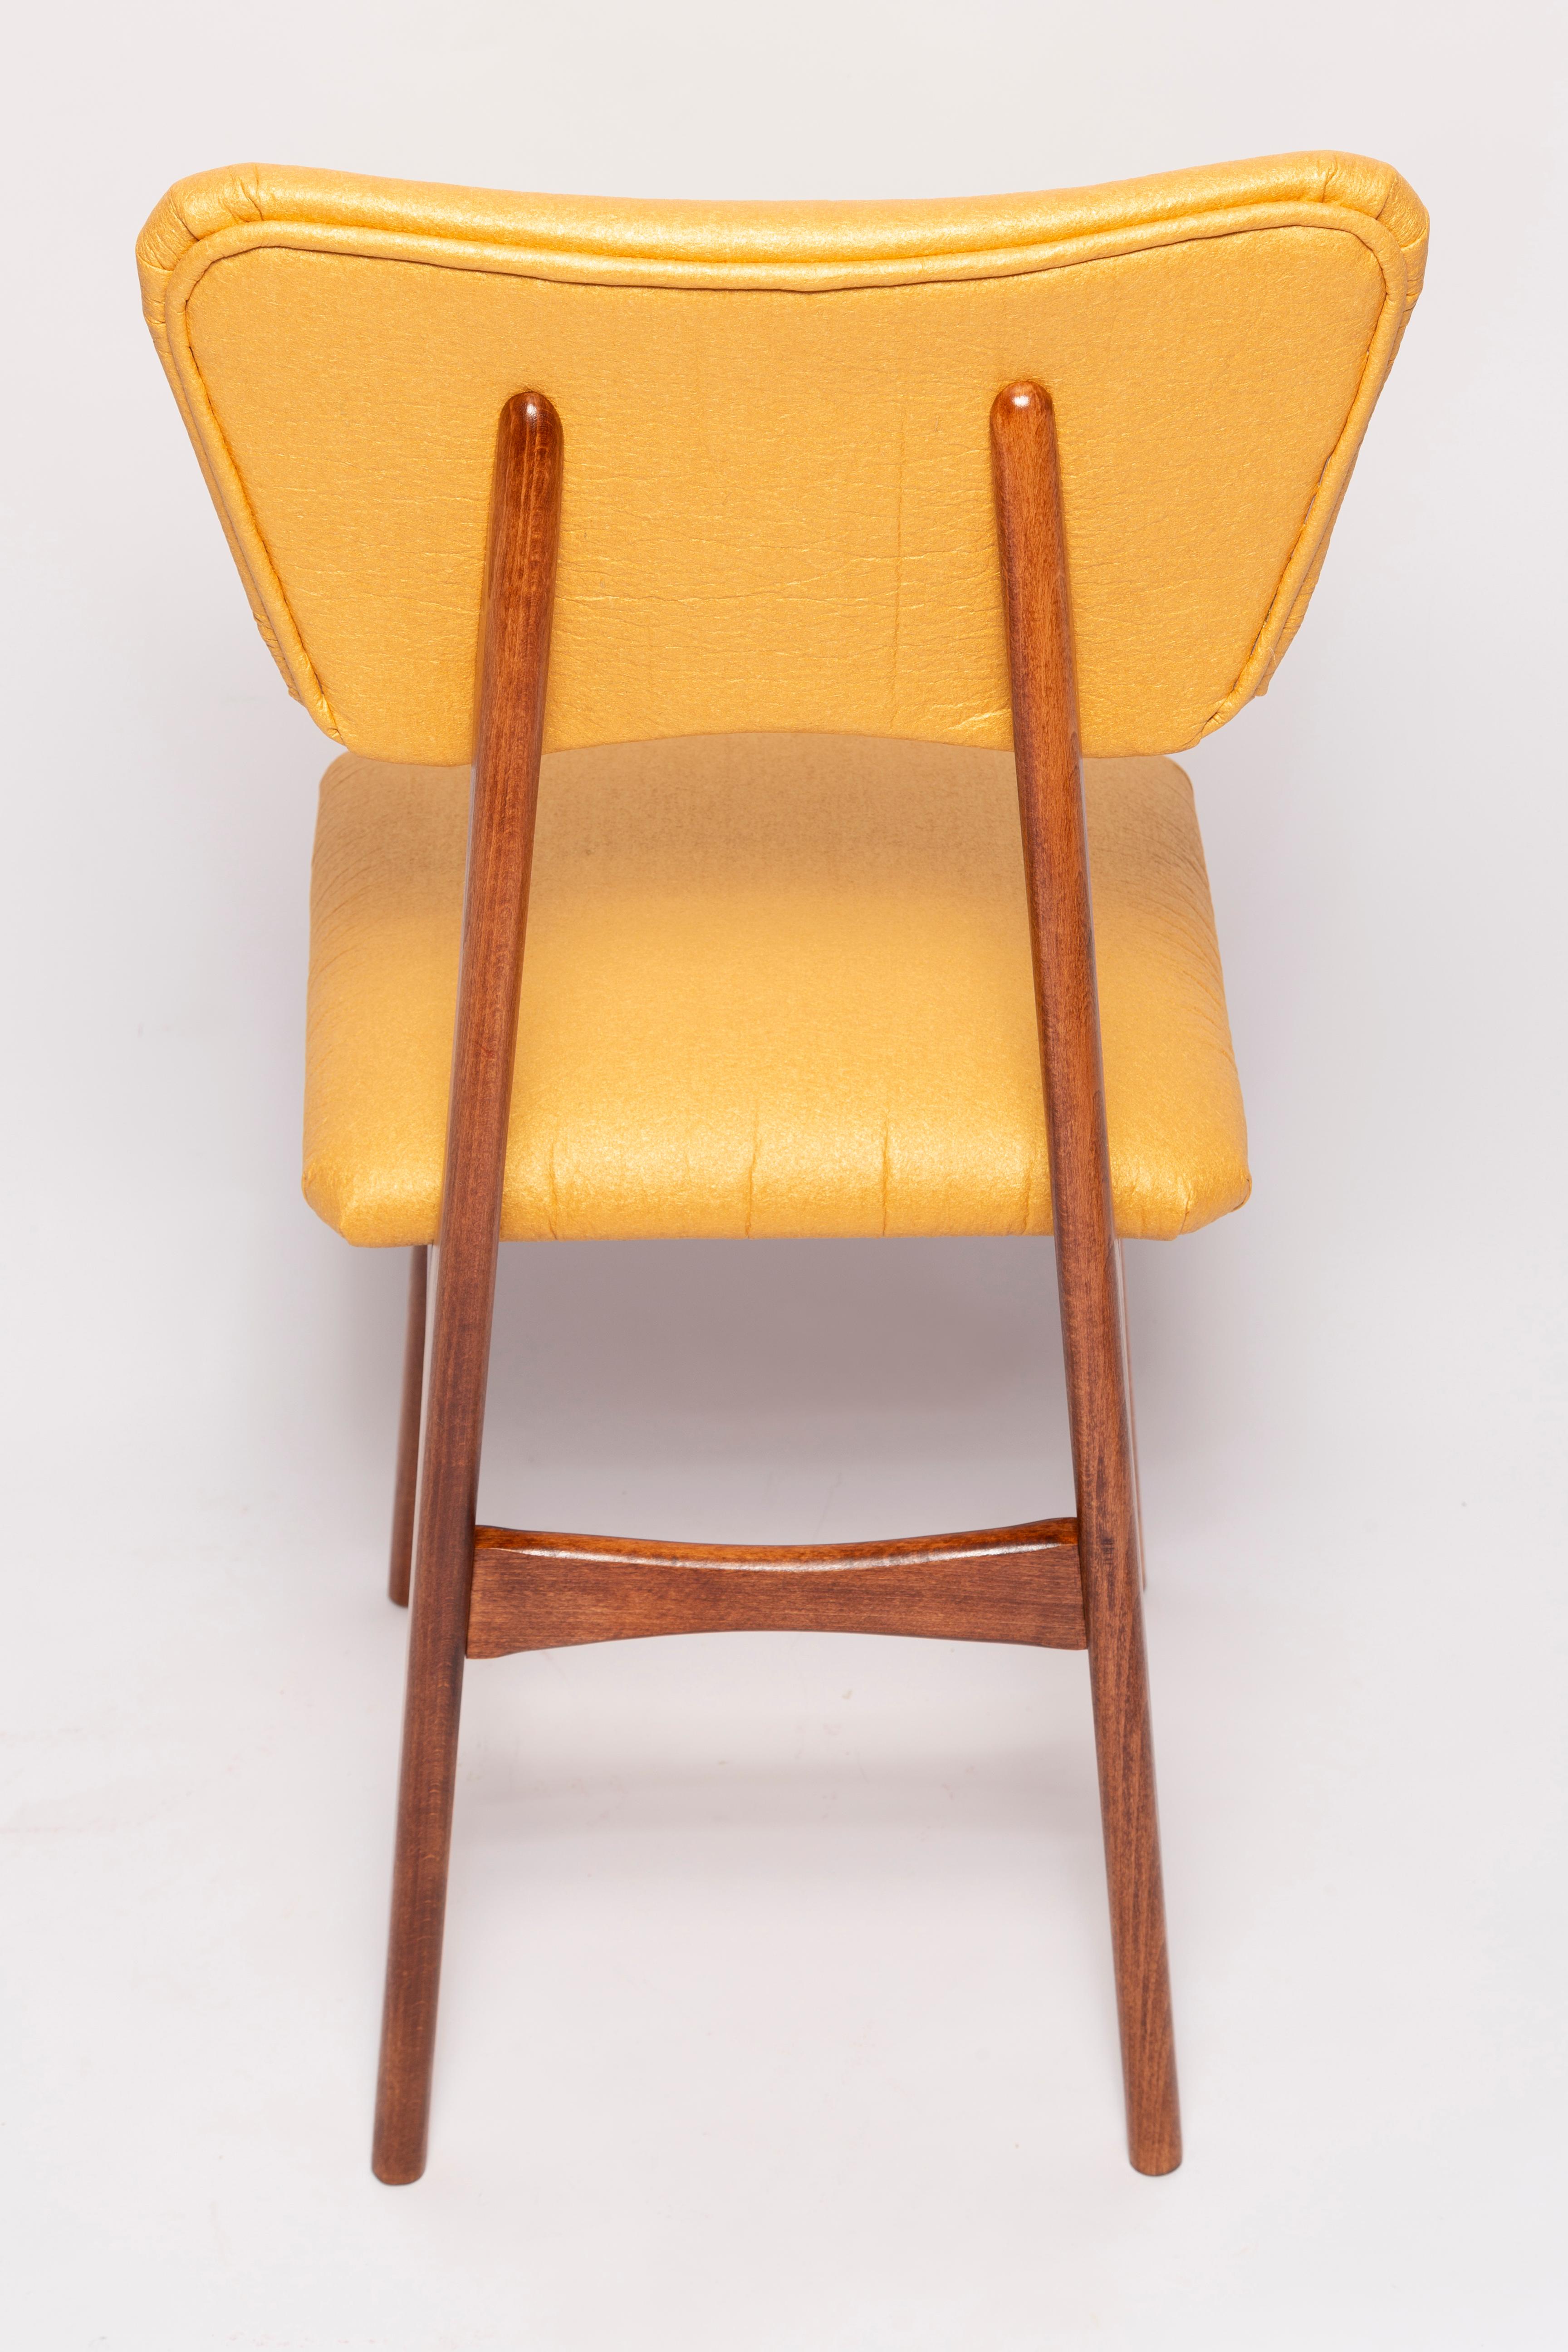 Mid Century Butterfly Dining Chair, Pineapple Vegan Leather, Europe, 1960s For Sale 6